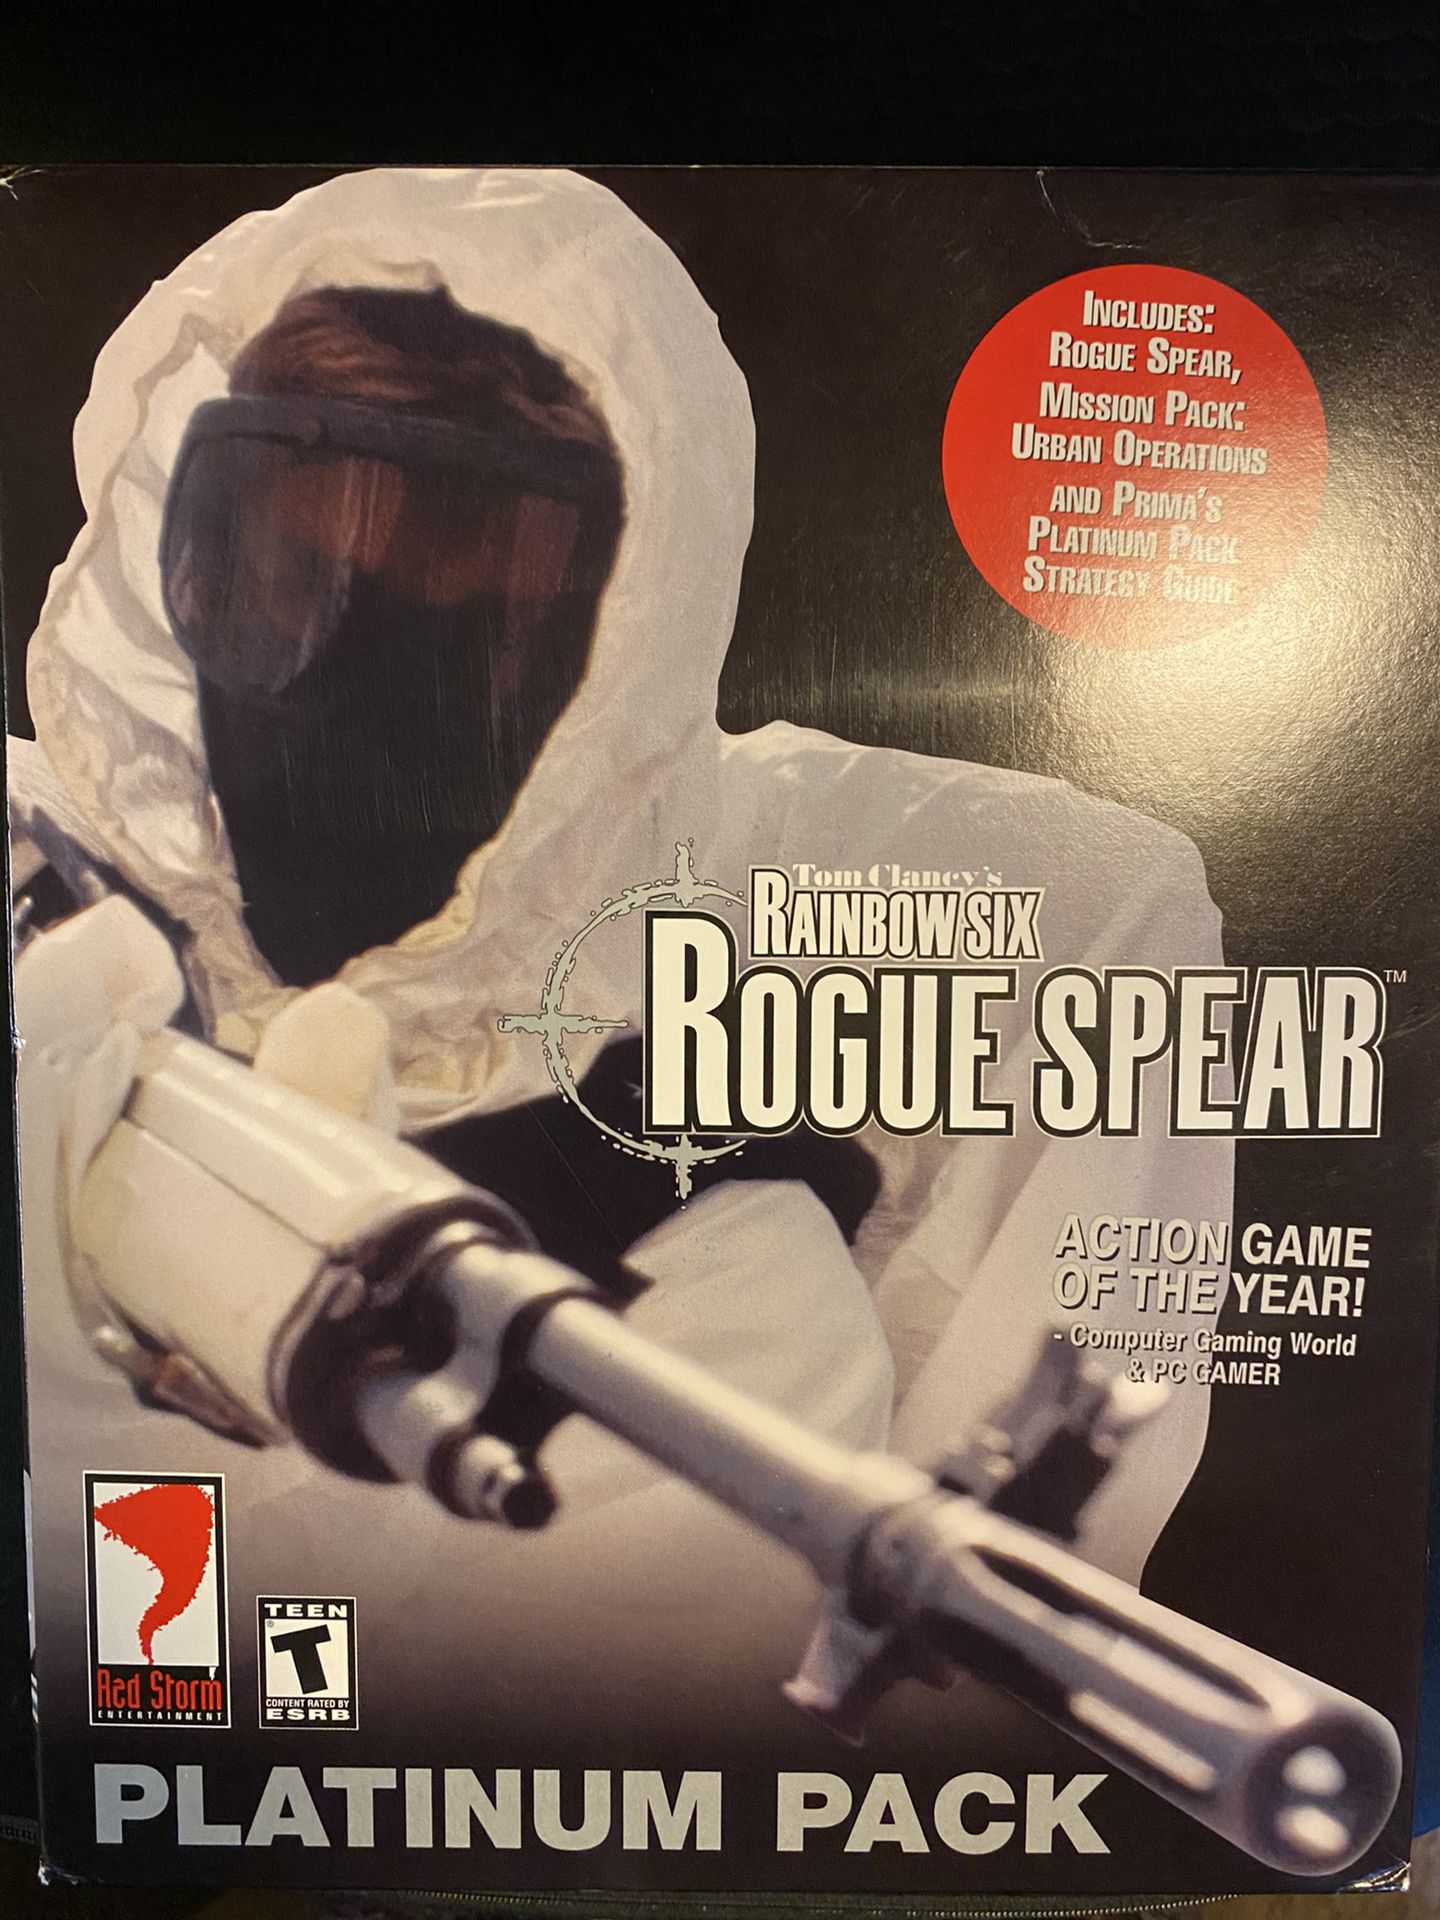 Tom Clancy’s Rainbow Six Rogue Spear pc game